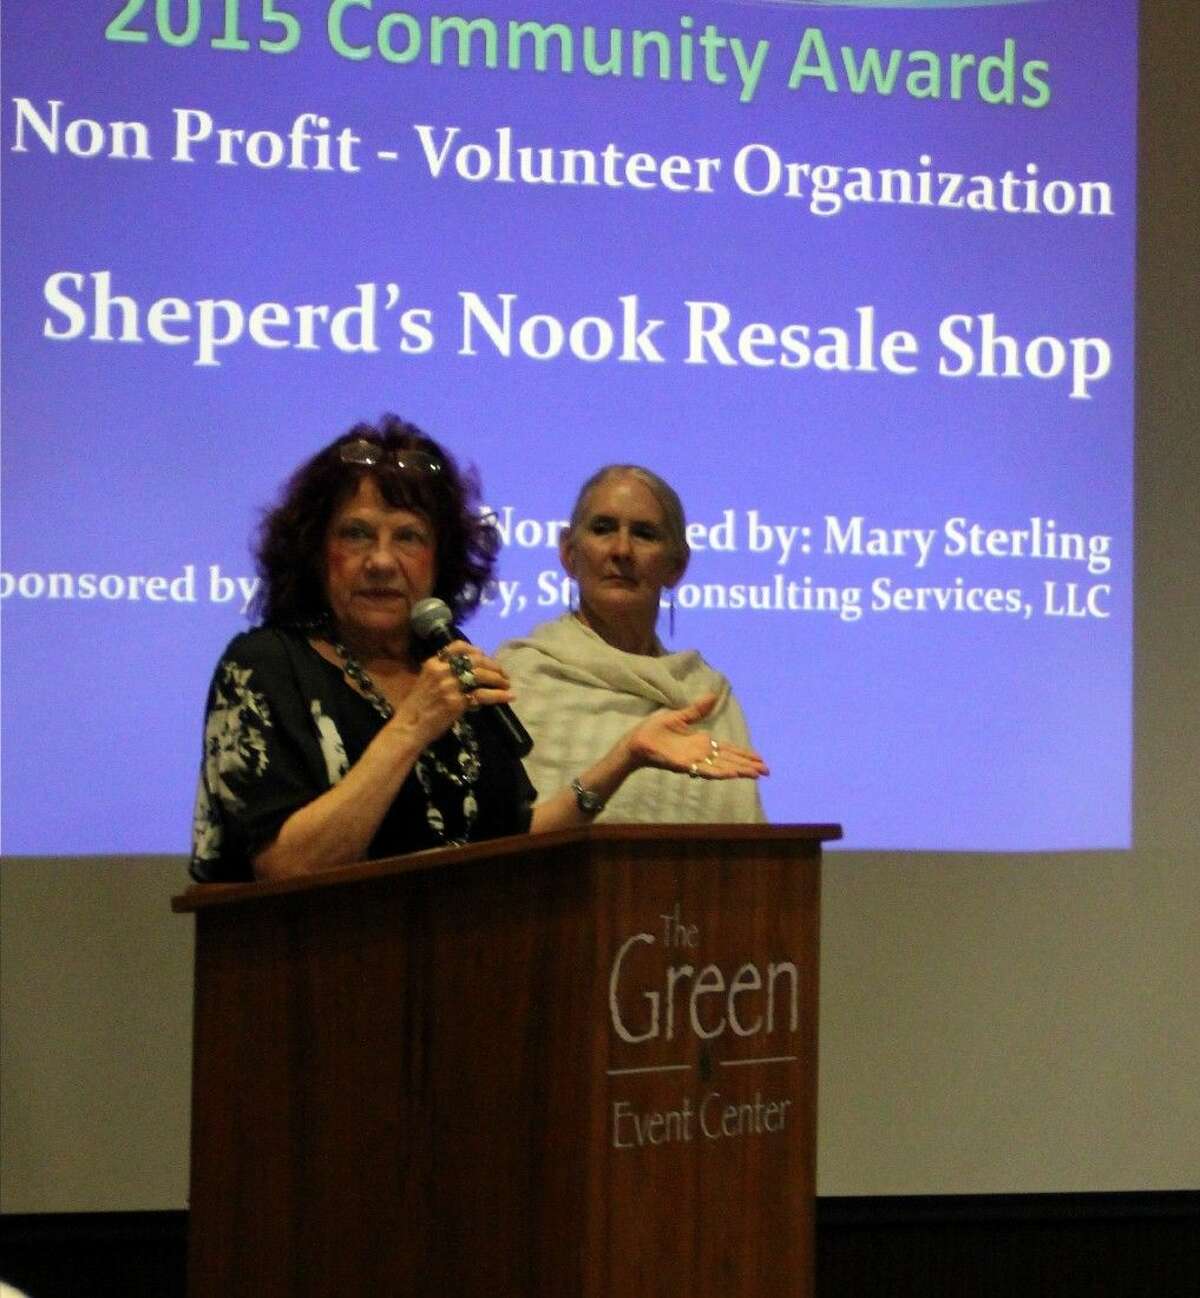 The Shepherd’s Nook Re-Sale Shop won the Friendswood Chamber Commerce Community Award for Non-Profit Volunteer.